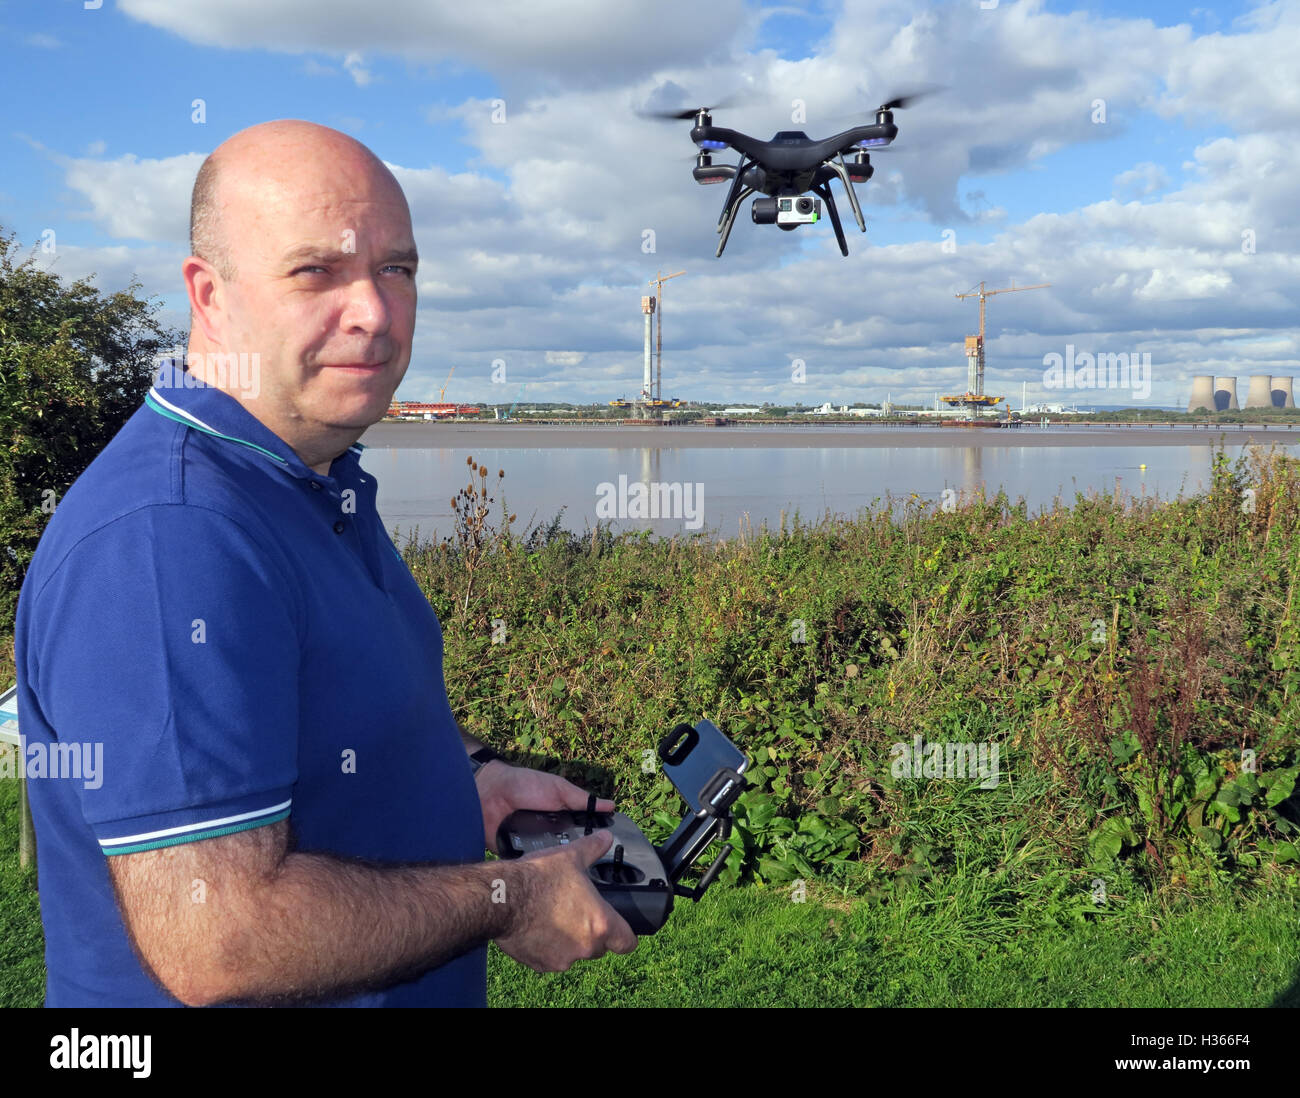 Flying Man 3X8 RTF DR drone près de Mersey, Merseyside, Angleterre Banque D'Images